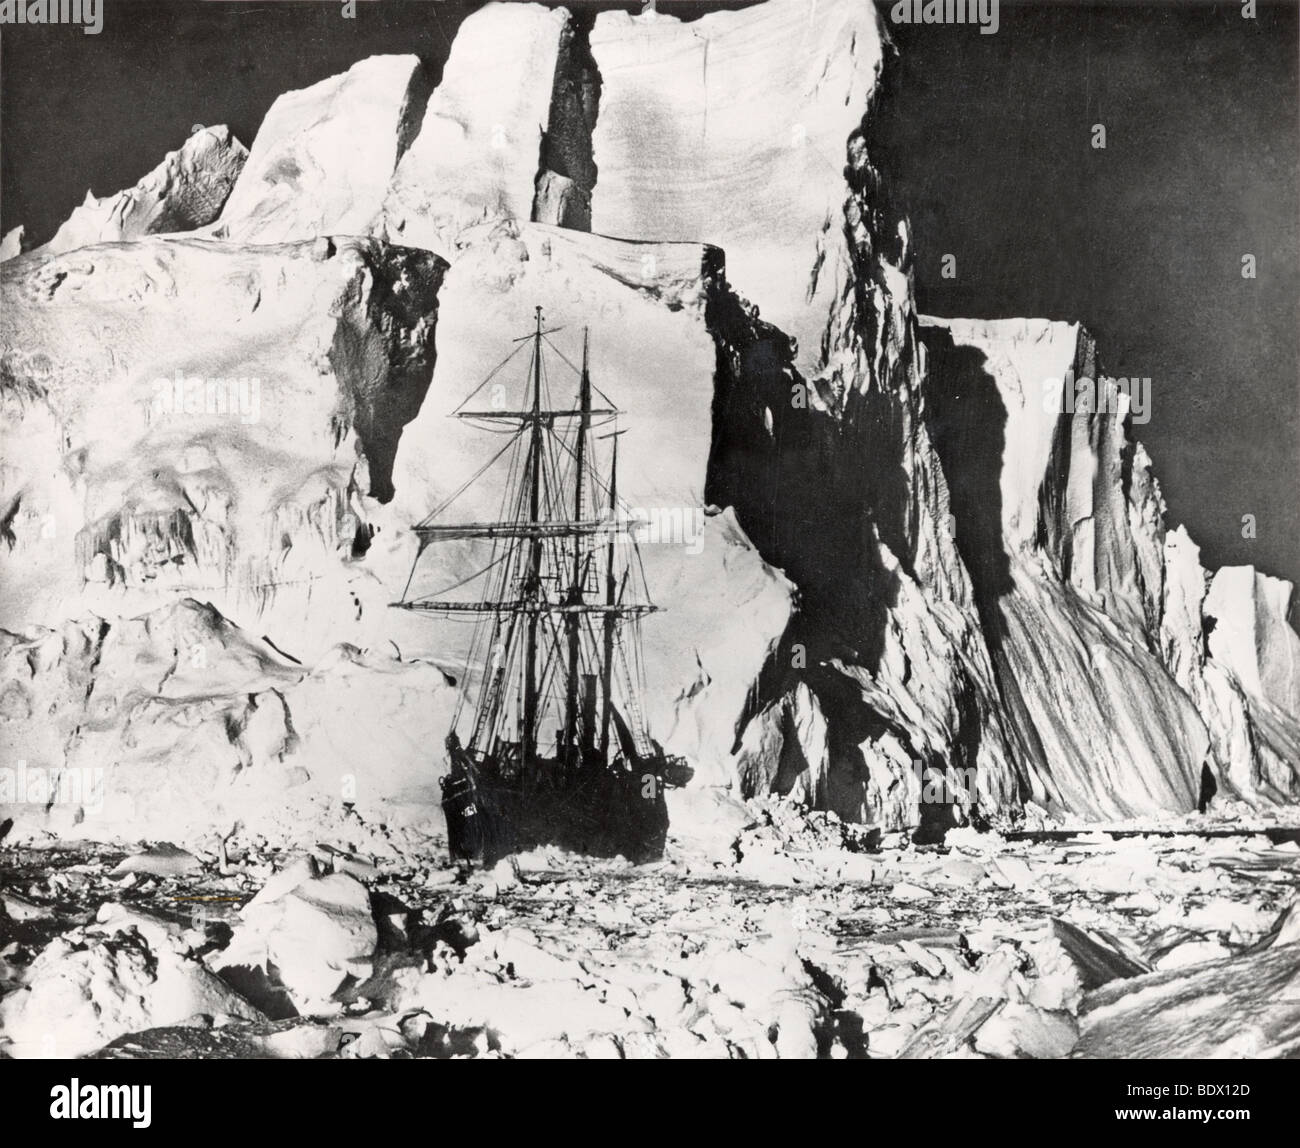 SHACKLETON'S SHIP ENDURANCE trapped in the Antarctic ice in 1916 photographed by Frank Hurley Stock Photo